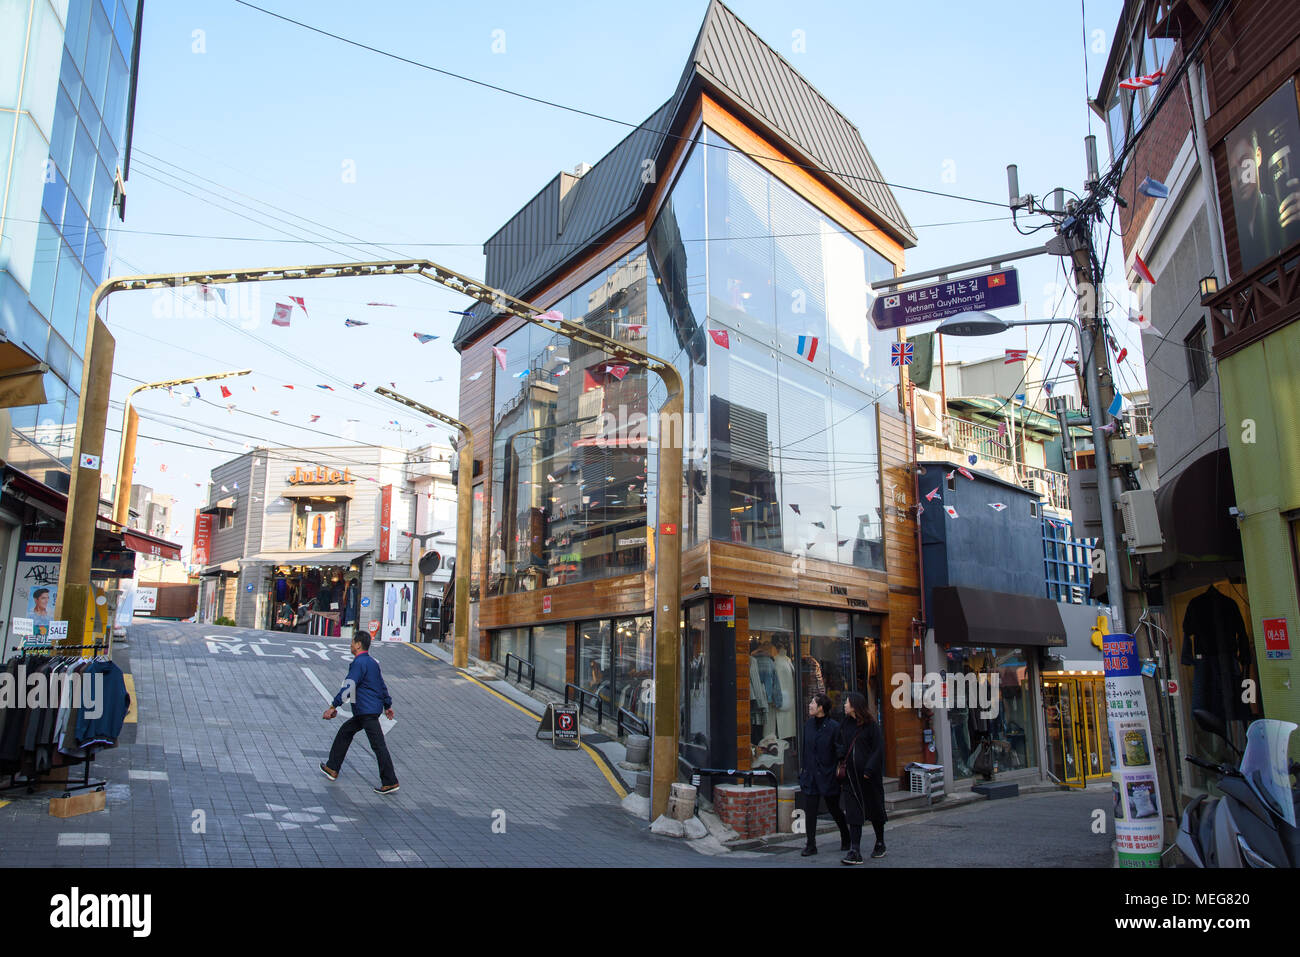 Itaewon In Seoul, SOUTH KOREA - November 26, 2017:Vietnam QuyNhon-gil in Itaewon, Seoul. Itaewon in Seoul is a place where cultures of various countri Stock Photo